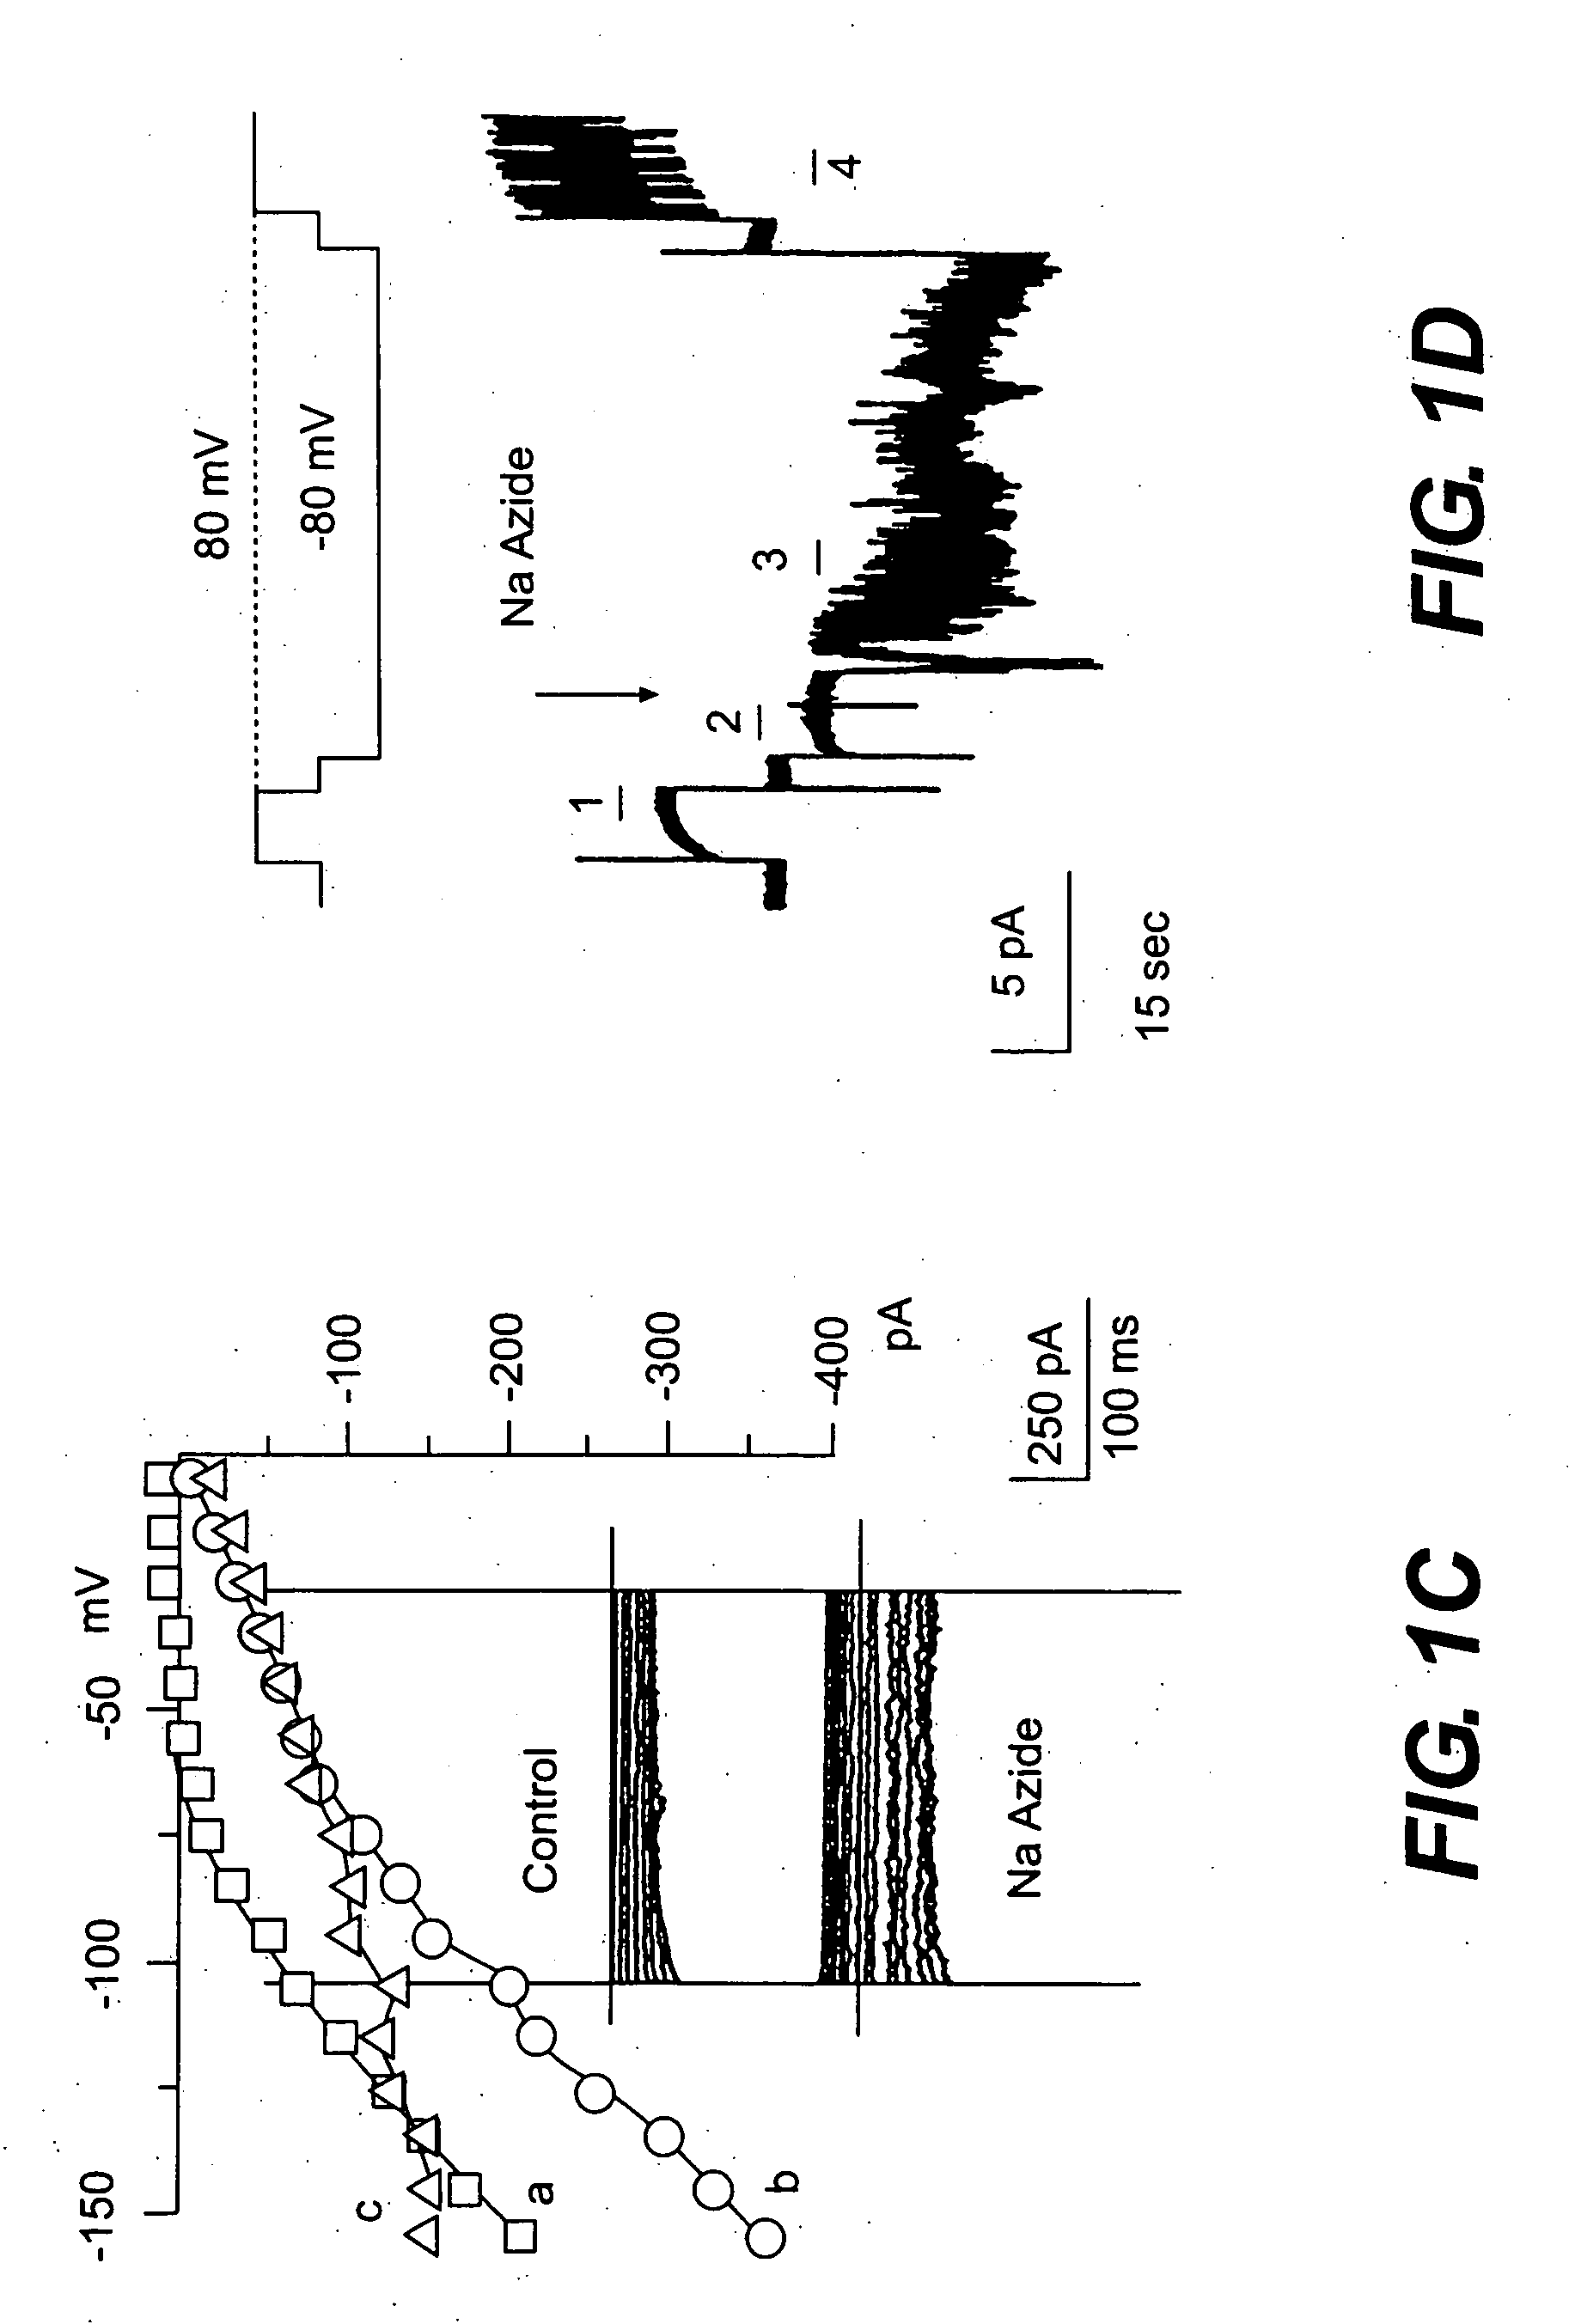 Novel non-selective cation channel in neuronal cells and methods for treating brain swelling